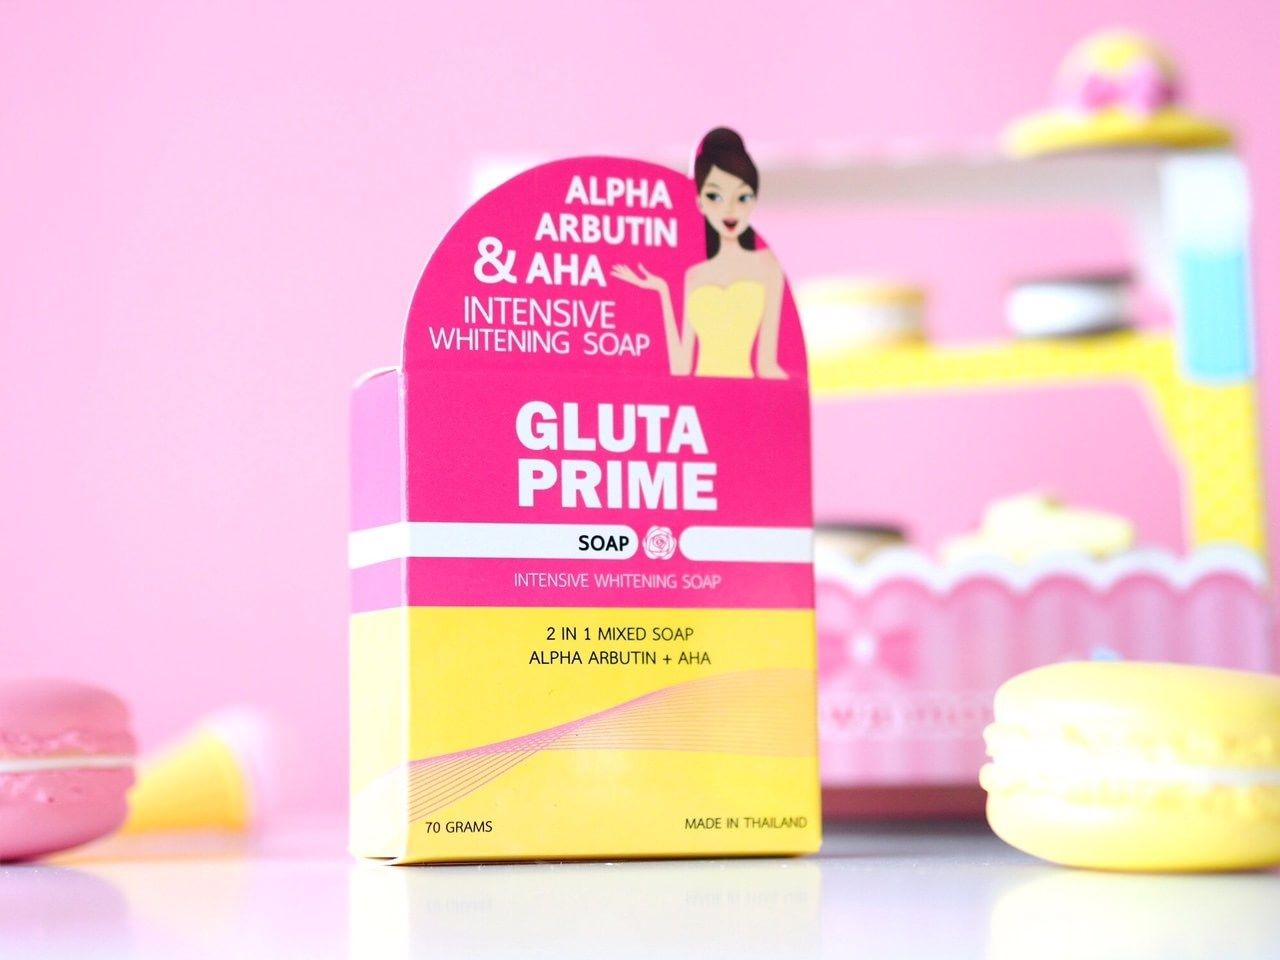 BEST OFFER: {Set1} GLUTAX 2800000GP with Gluta Pills, Vitamin C and Gluta Primme Soap (4 pcs.) by www.ccthaitown.com